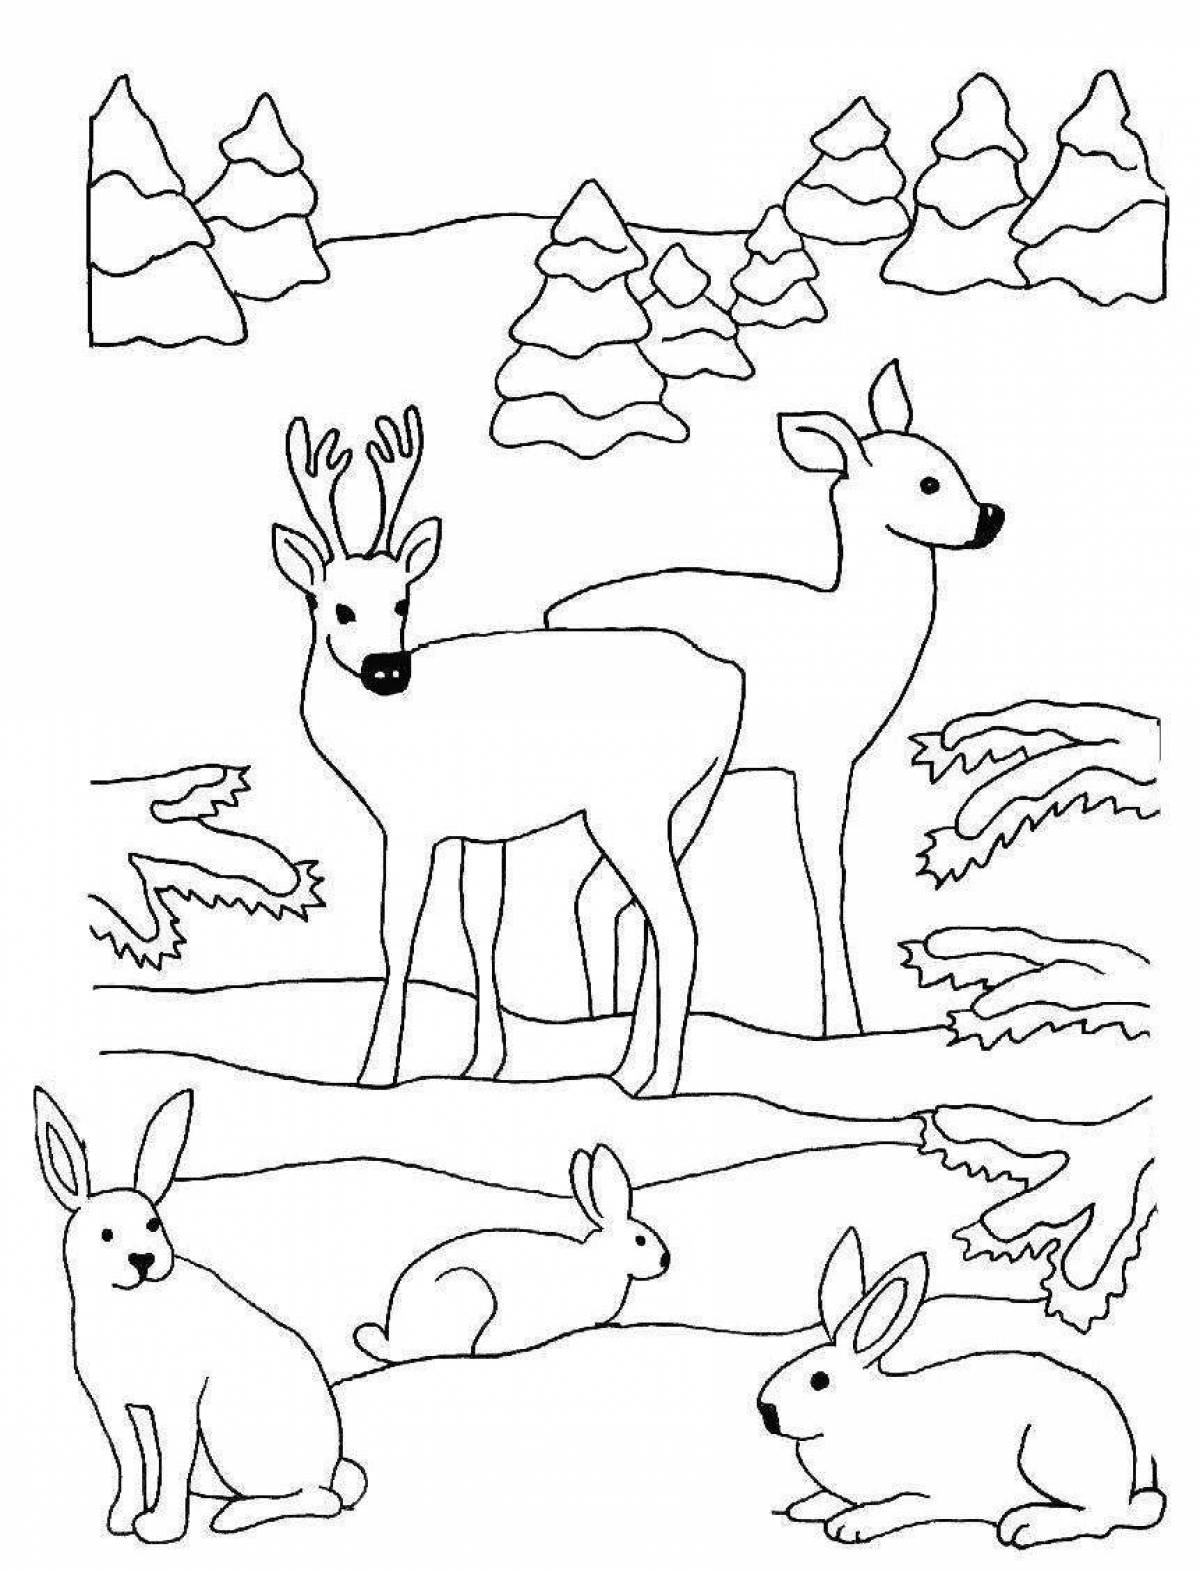 Coloring page cheerful winter forest with animals